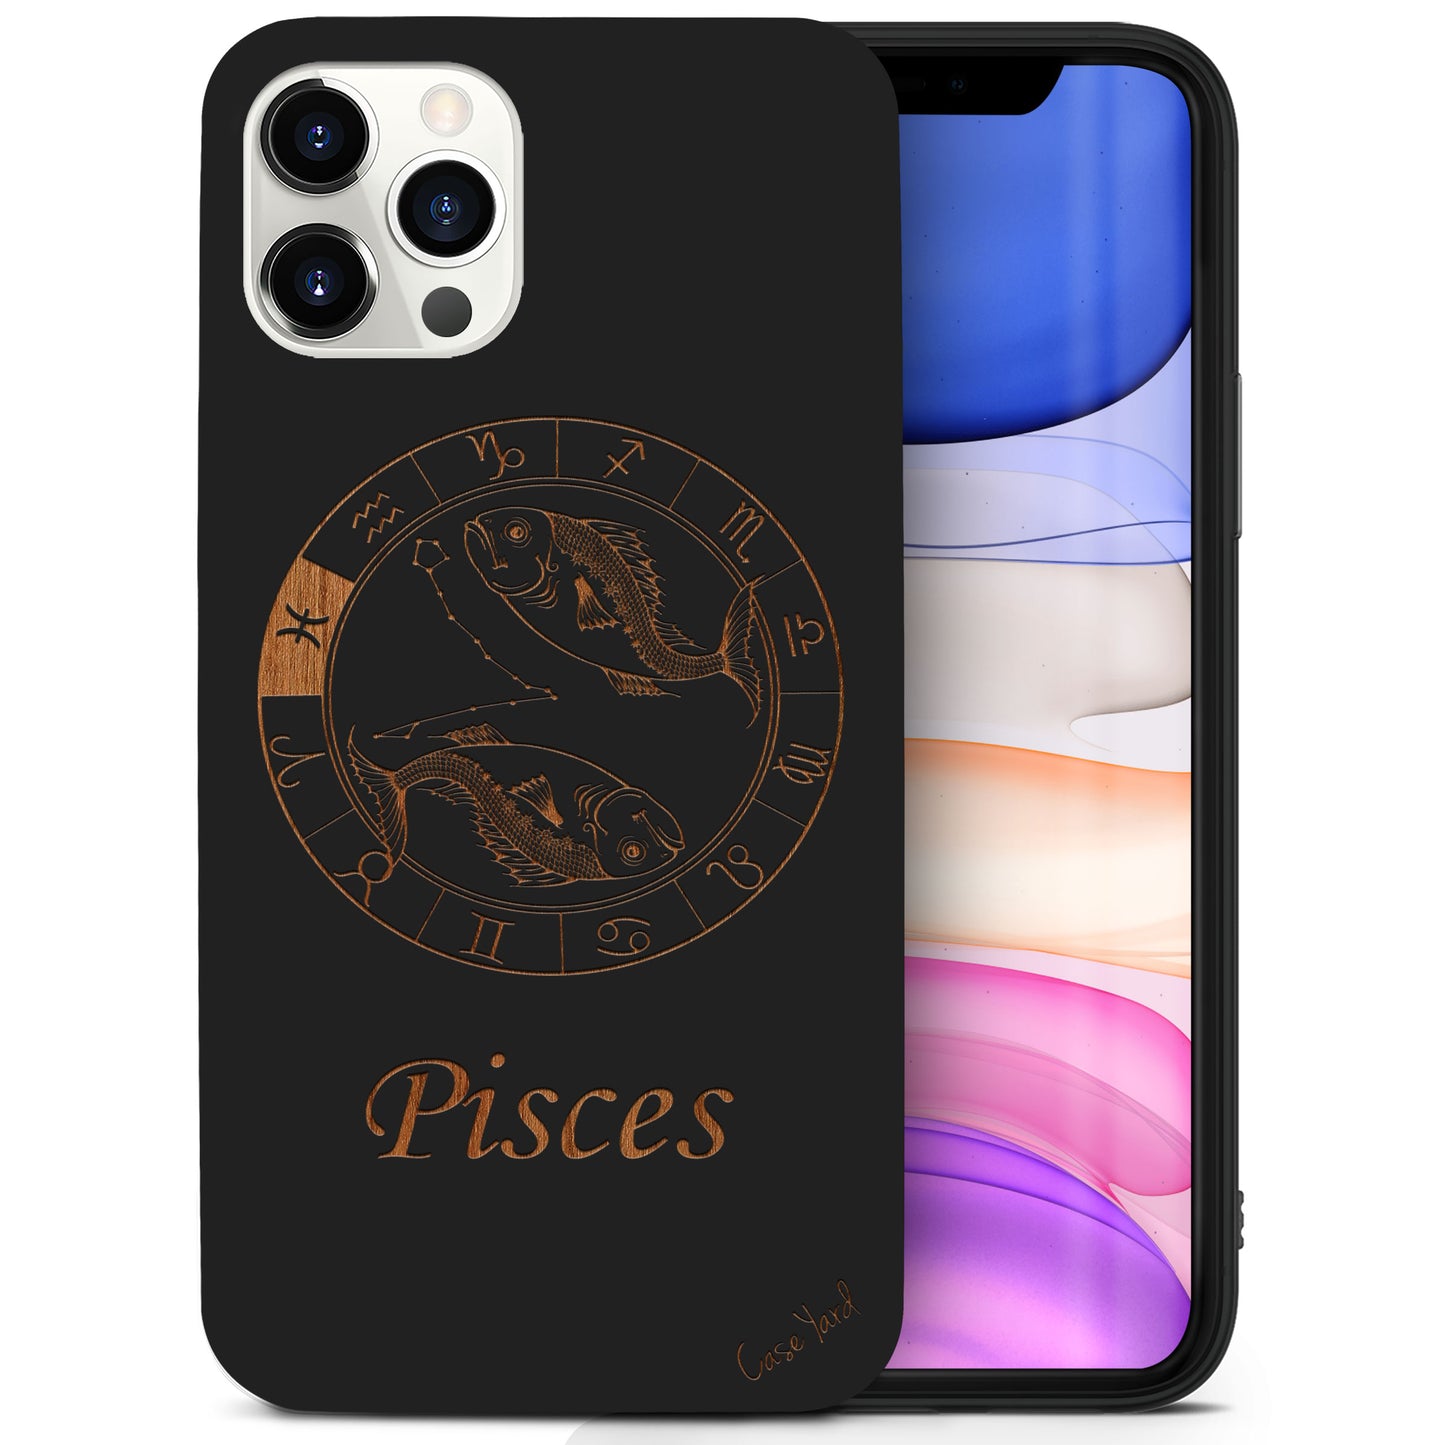 Wooden Cell Phone Case Cover, Laser Engraved case for iPhone & Samsung phone Pisces Sign Design